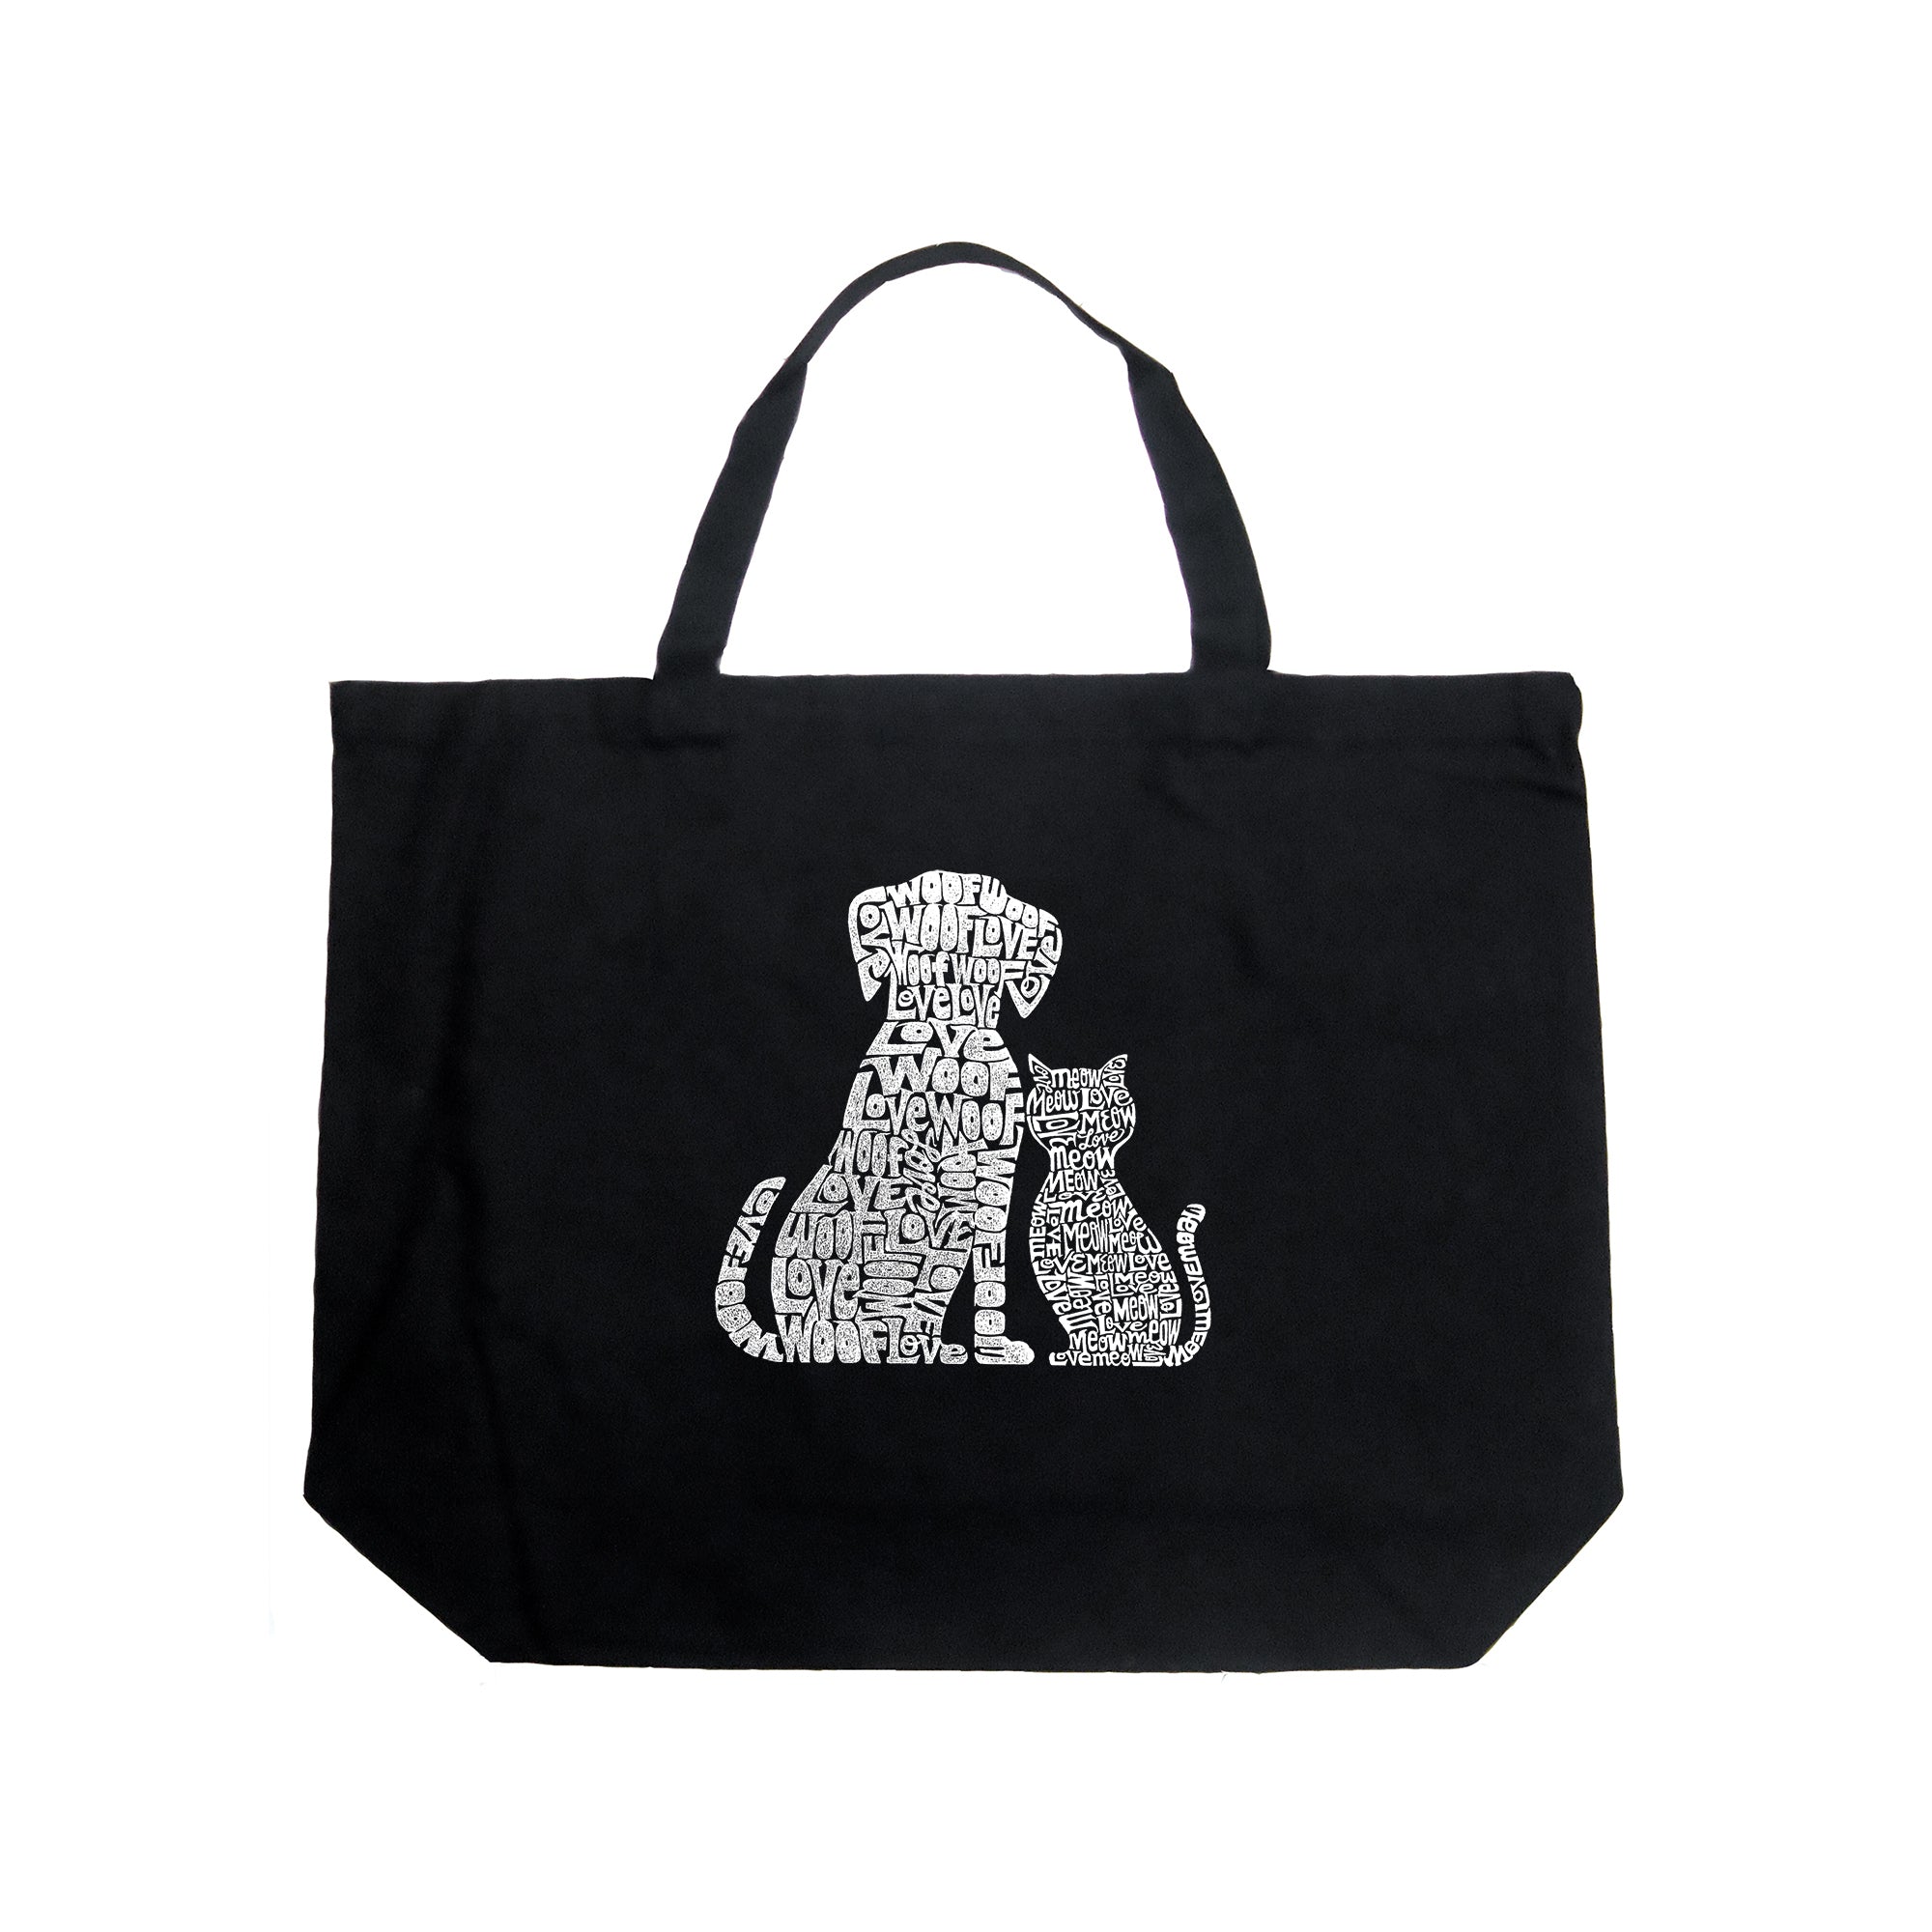 Large Word Art Tote Bag - Dogs And Cats - Large - Navy